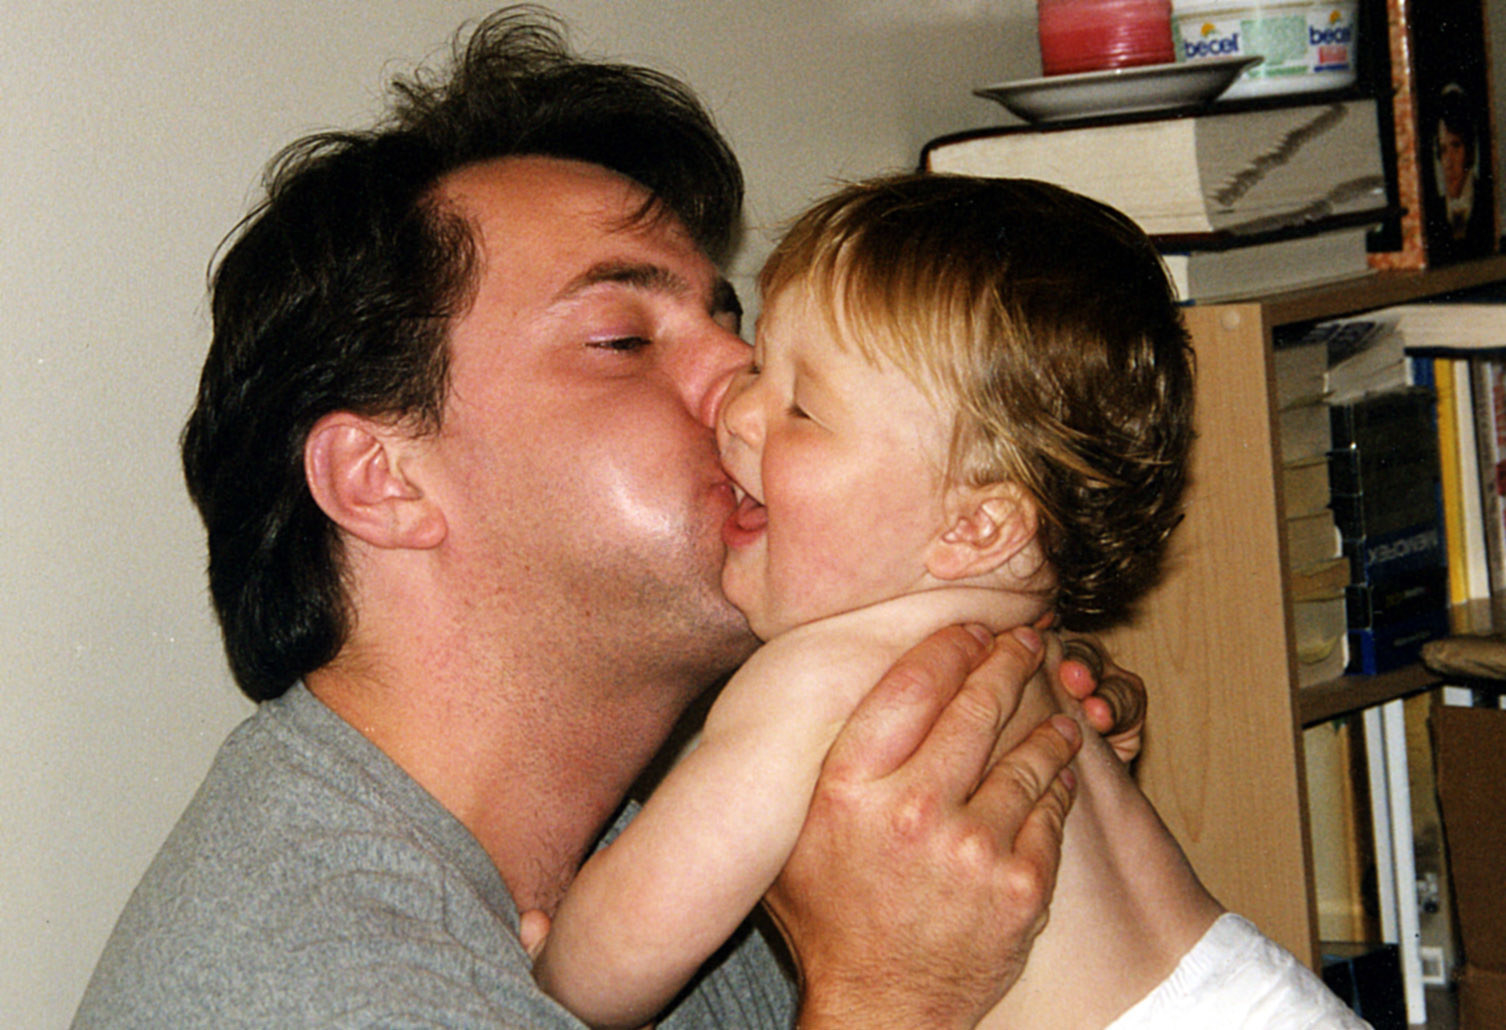 A man kissing his baby son on the cheek